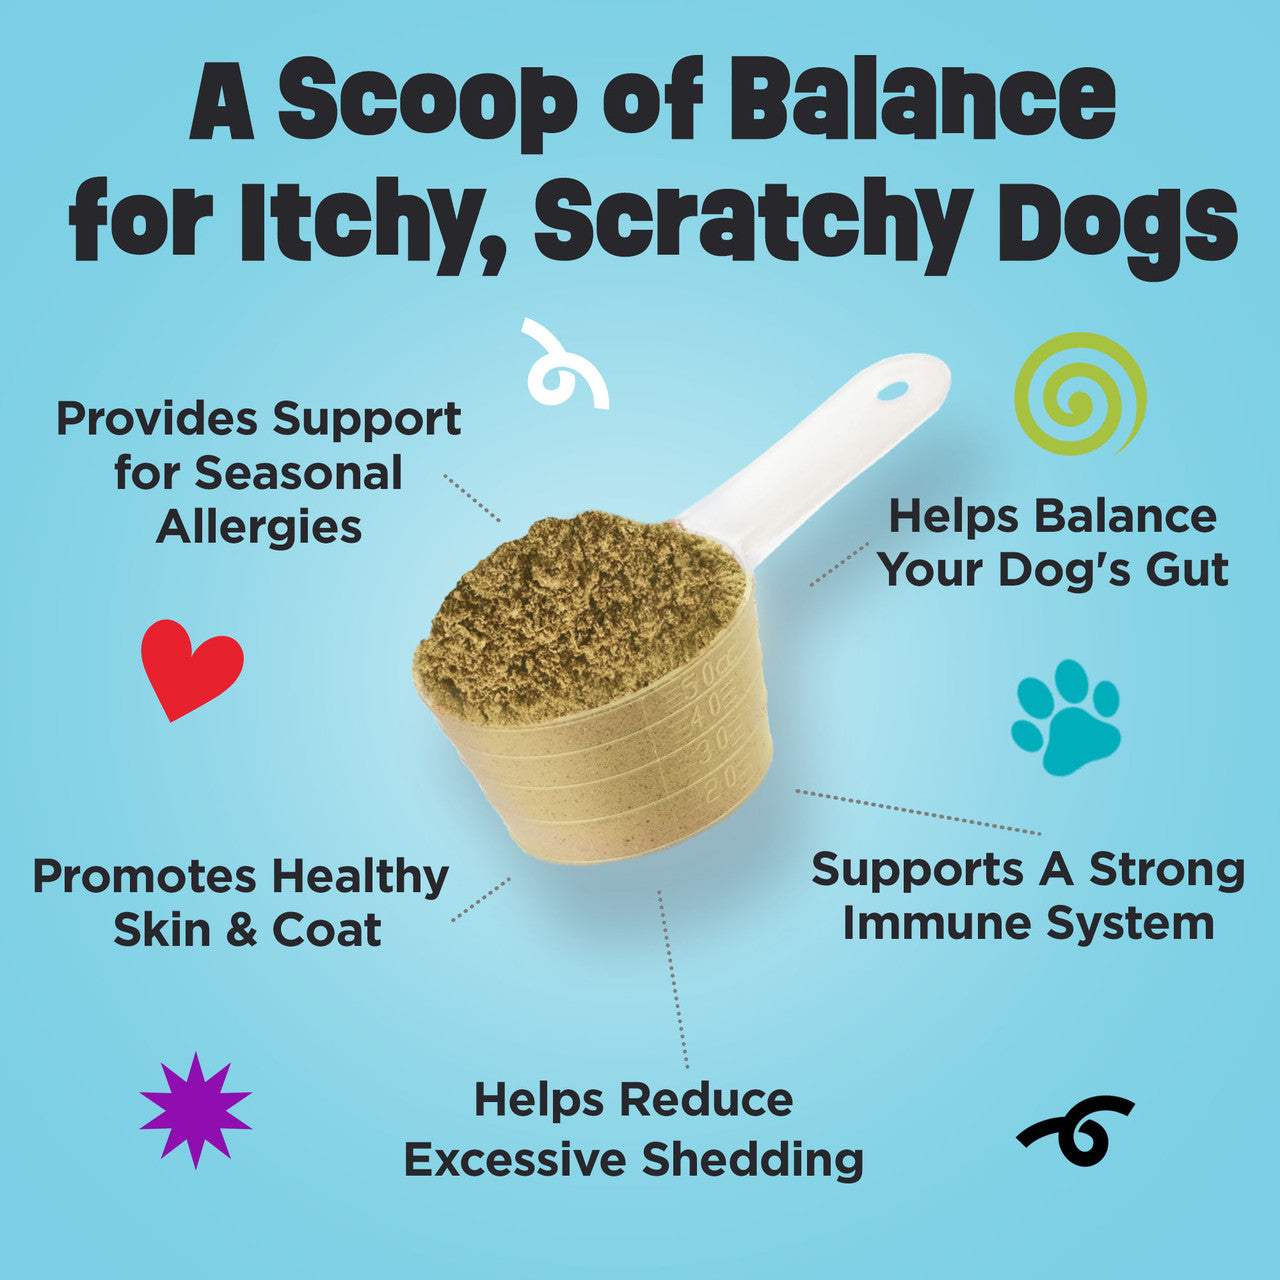 A Scoop of Balance for Itchy, scratchy dogs